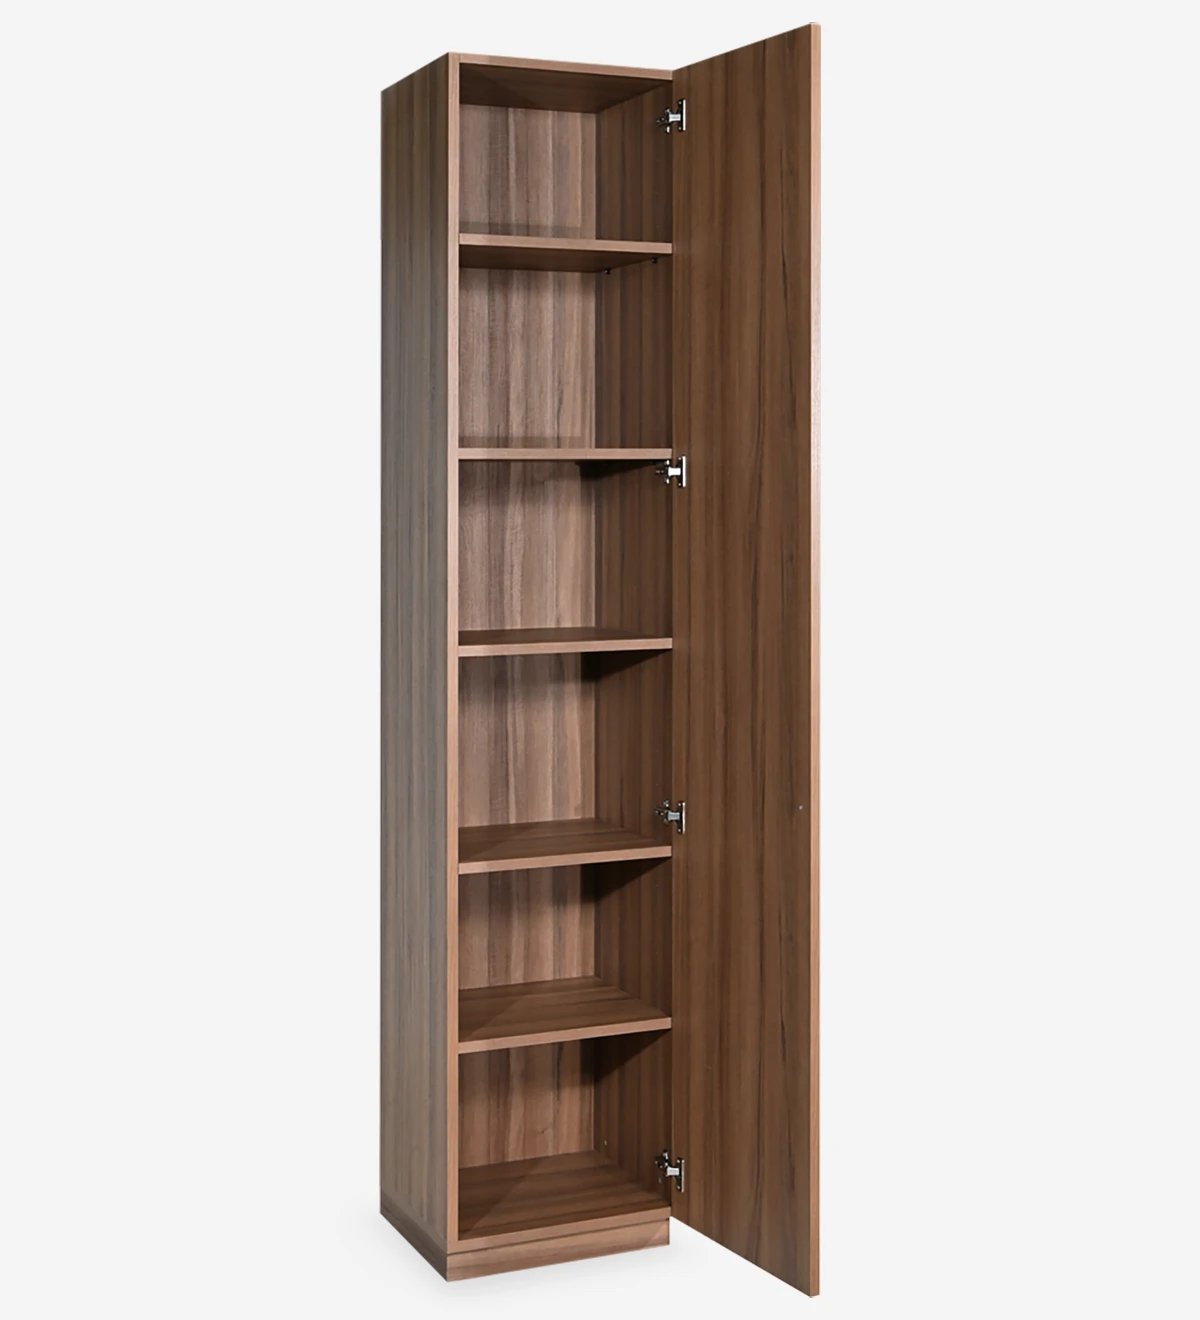 Tall bookcase in walnut, with 1 door and removable shelves.